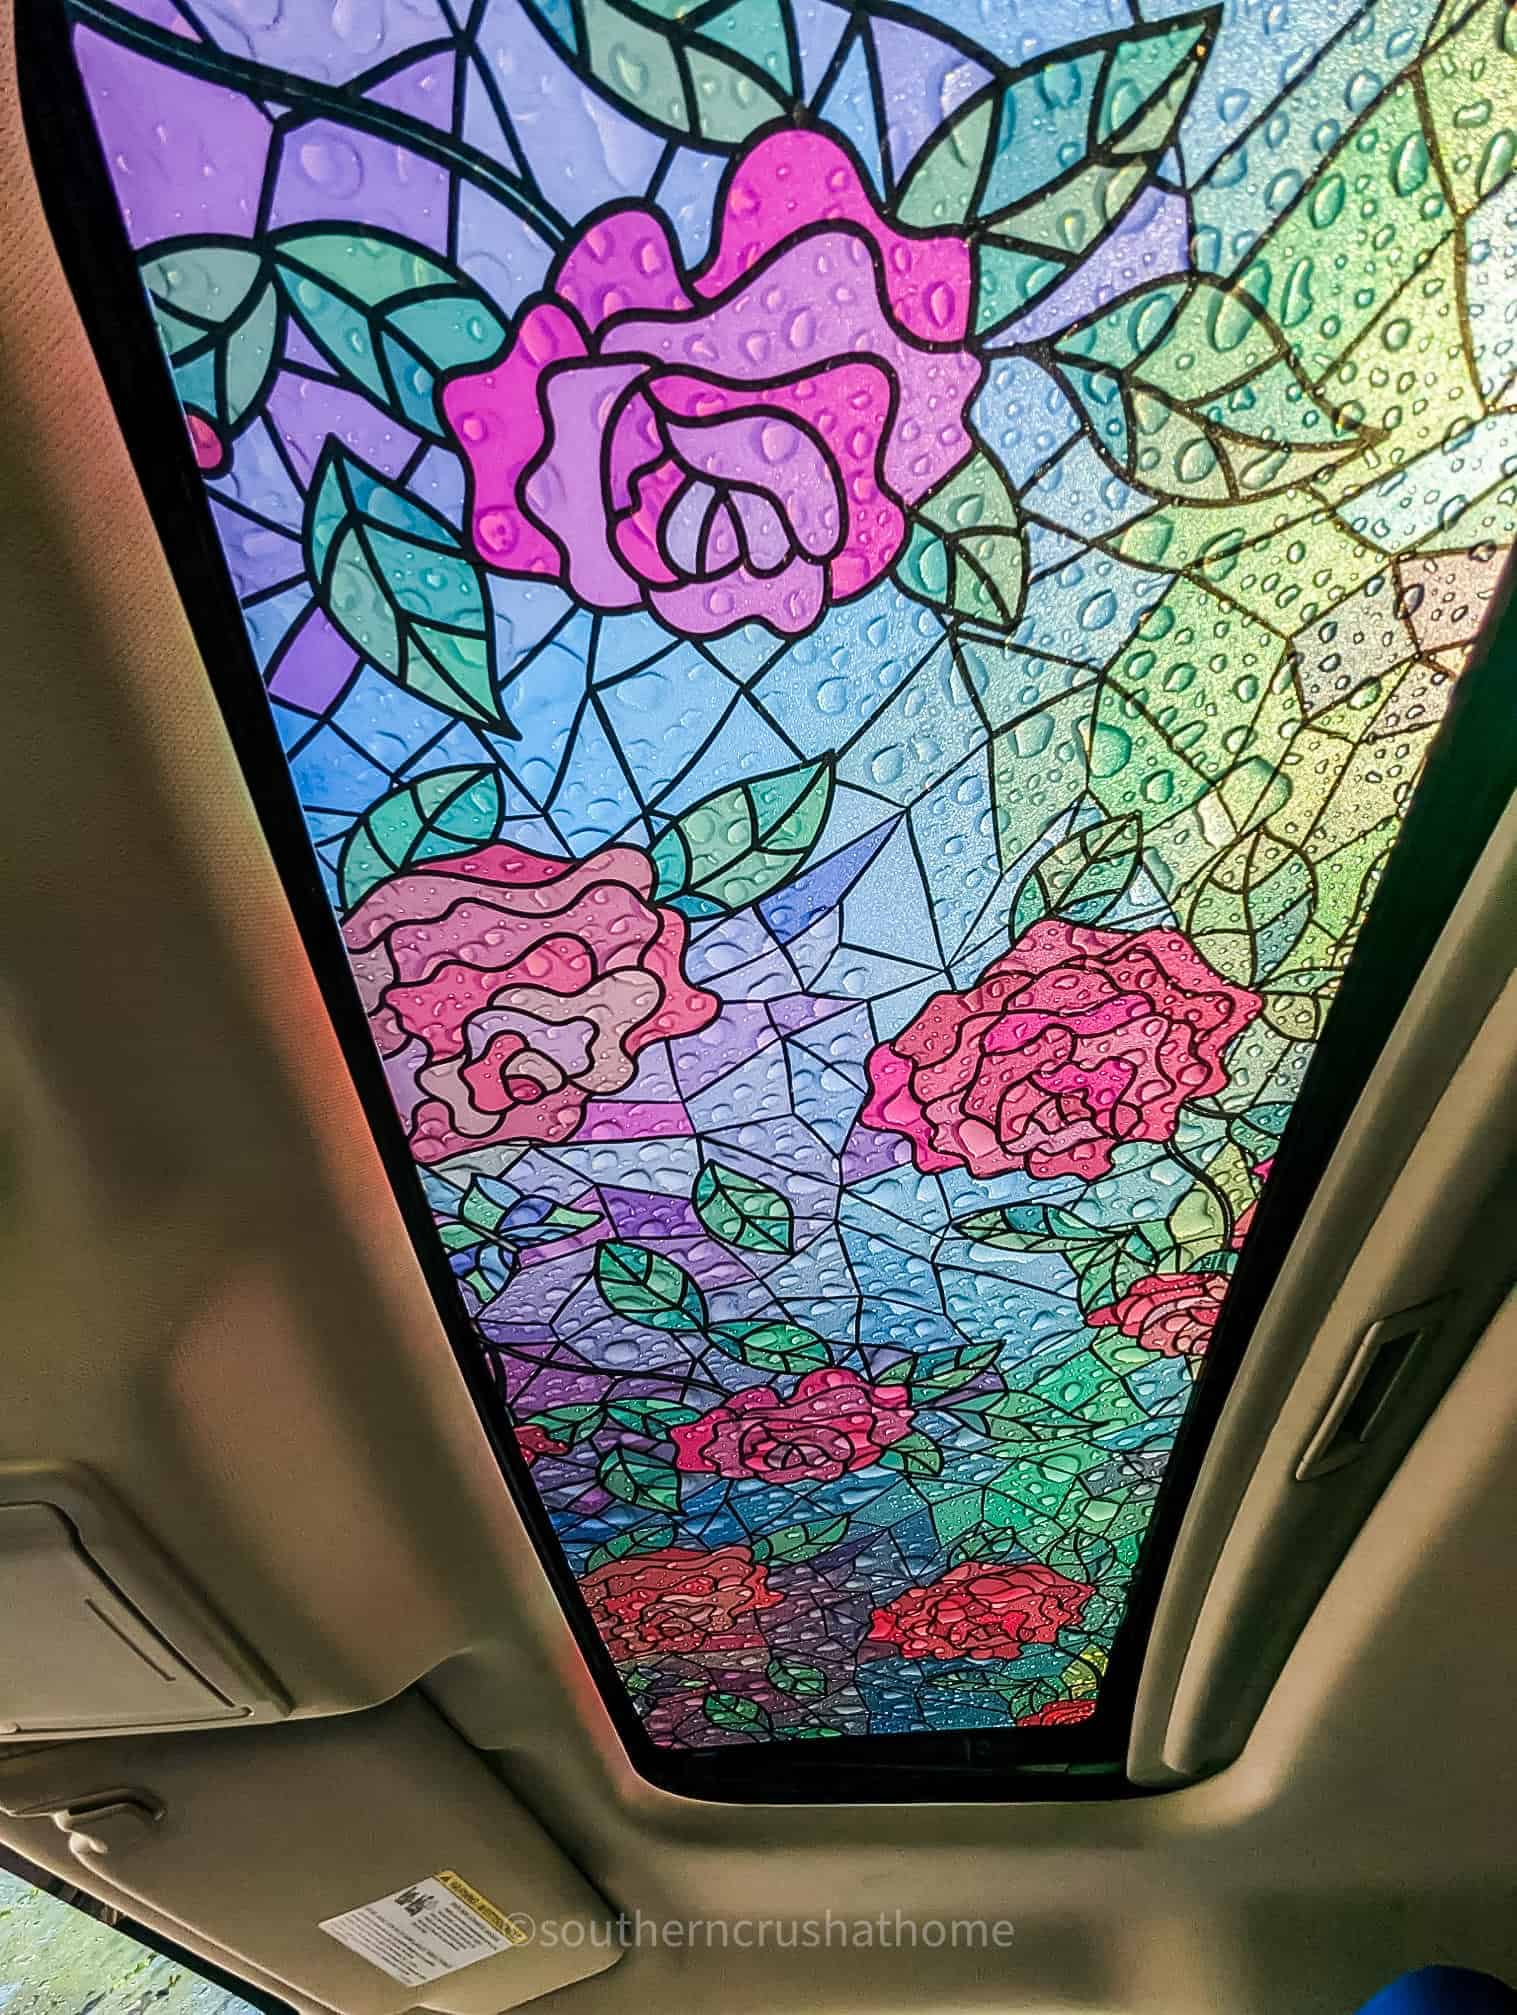 roses stained glass window film on sunroof